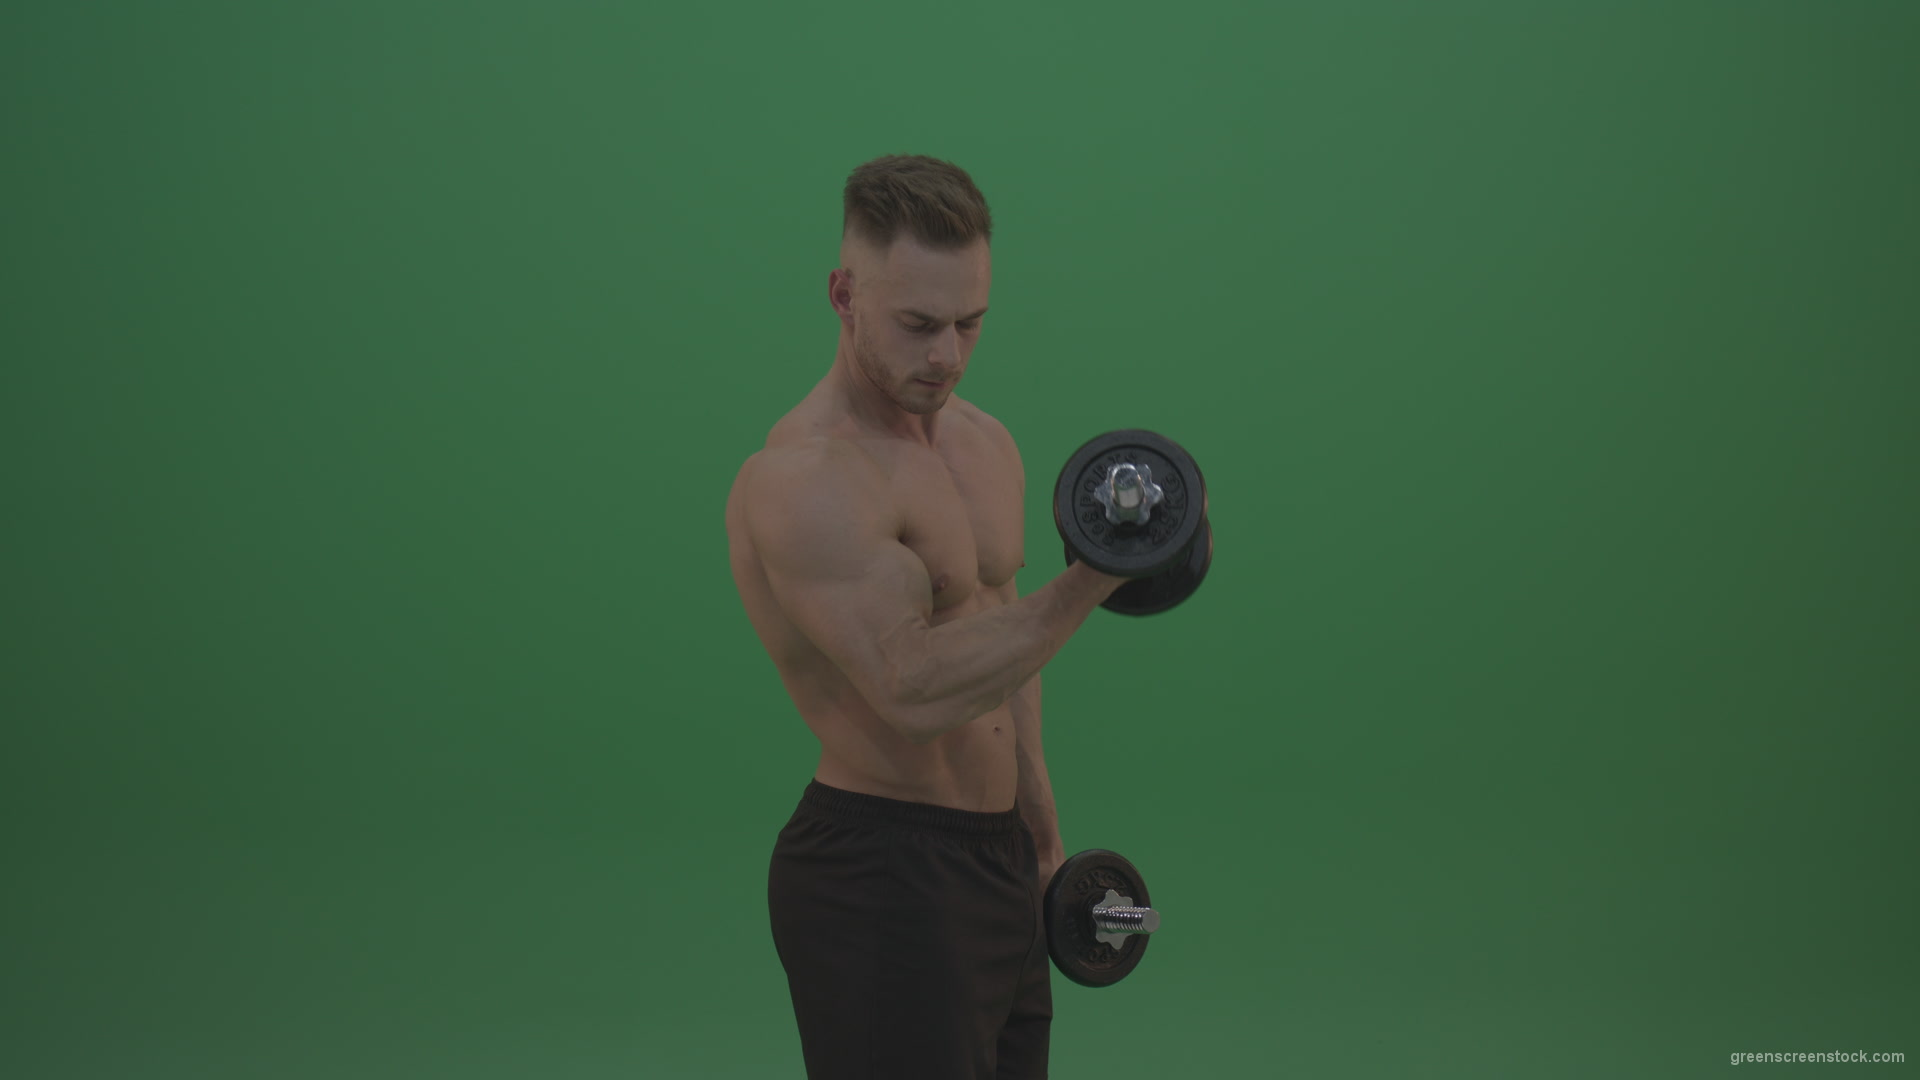 Young_Bodybuilder_Working_Out_Two_Handed_Dumbbell_Push_Ups_Excercise_On_Green_Screen_Wall_Background_006 Green Screen Stock